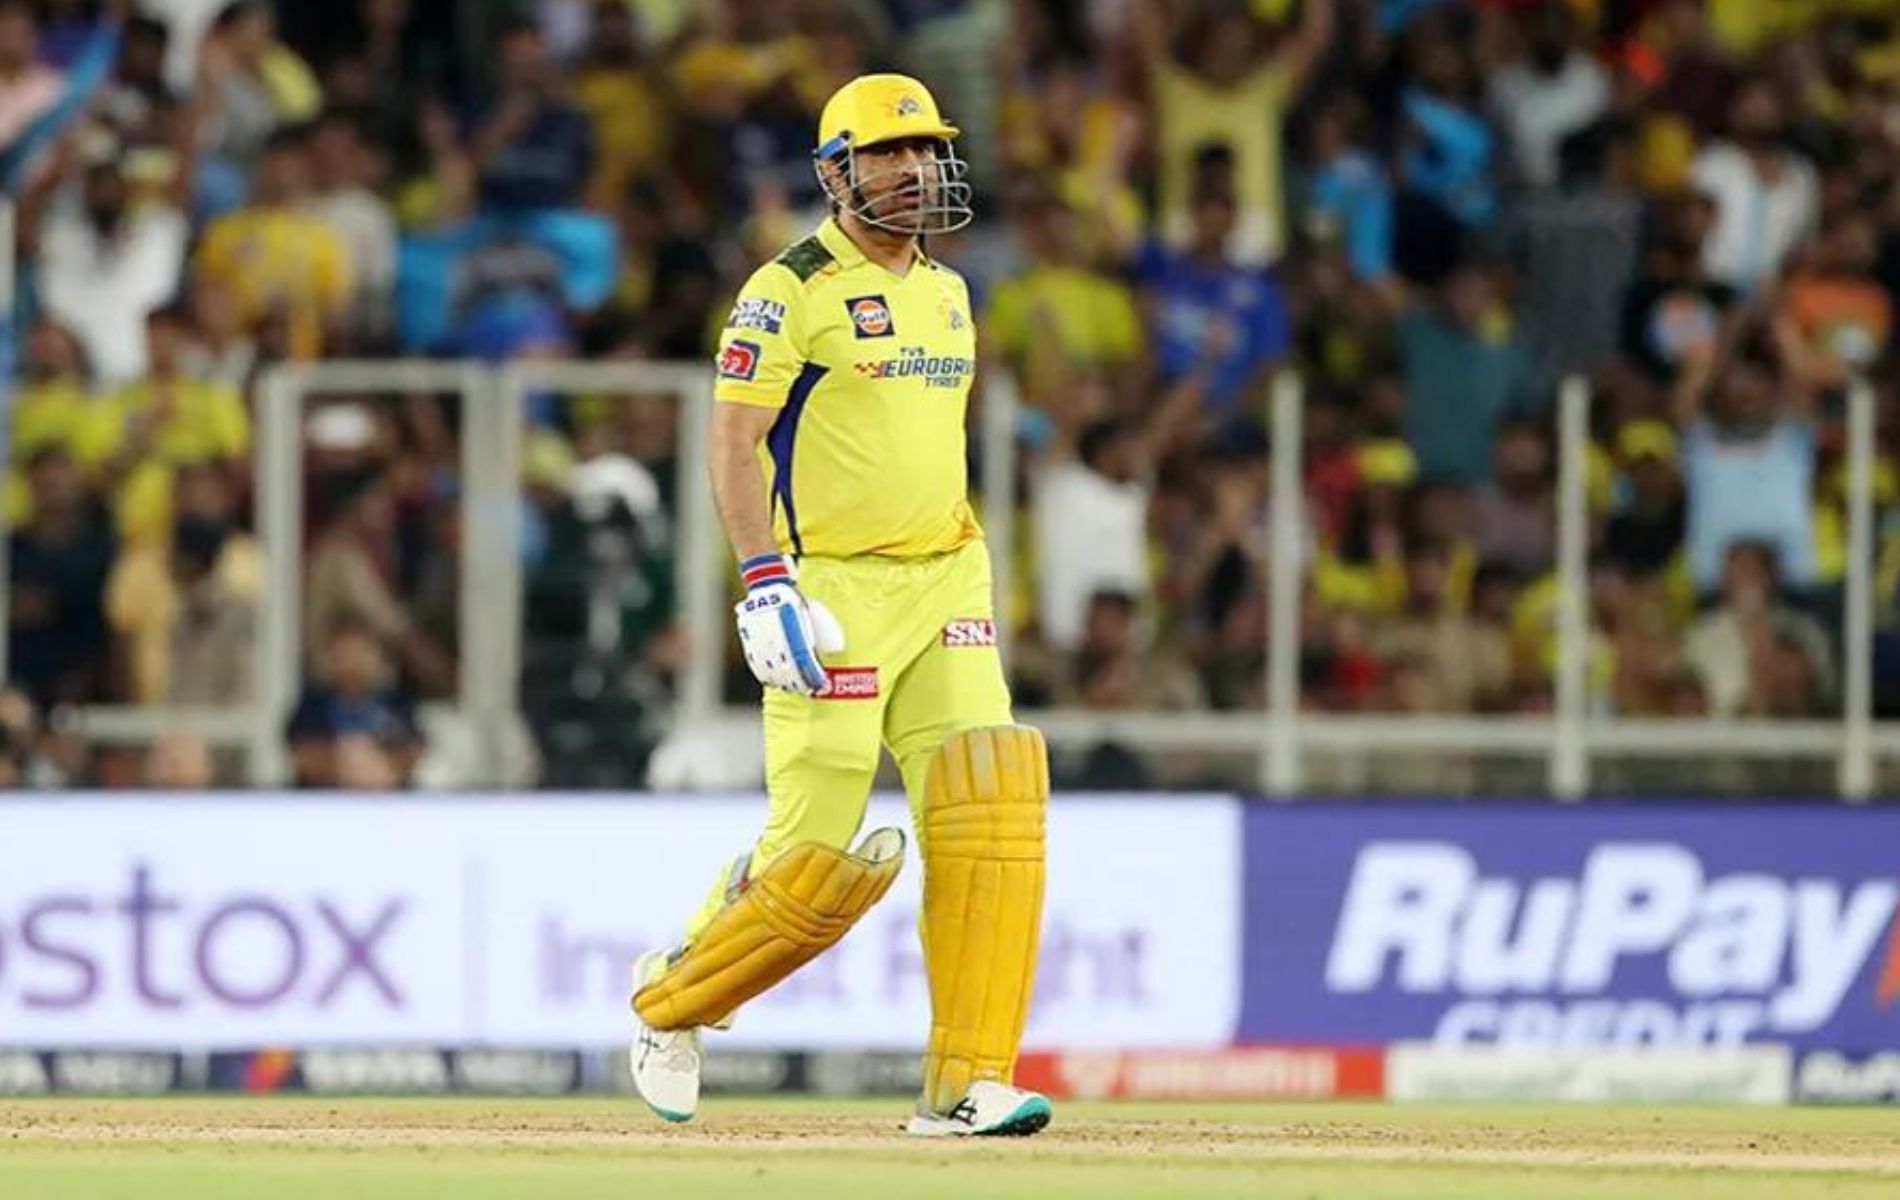 MS Dhoni was out for a first-ball duck. (Pic: IPLT20.com)